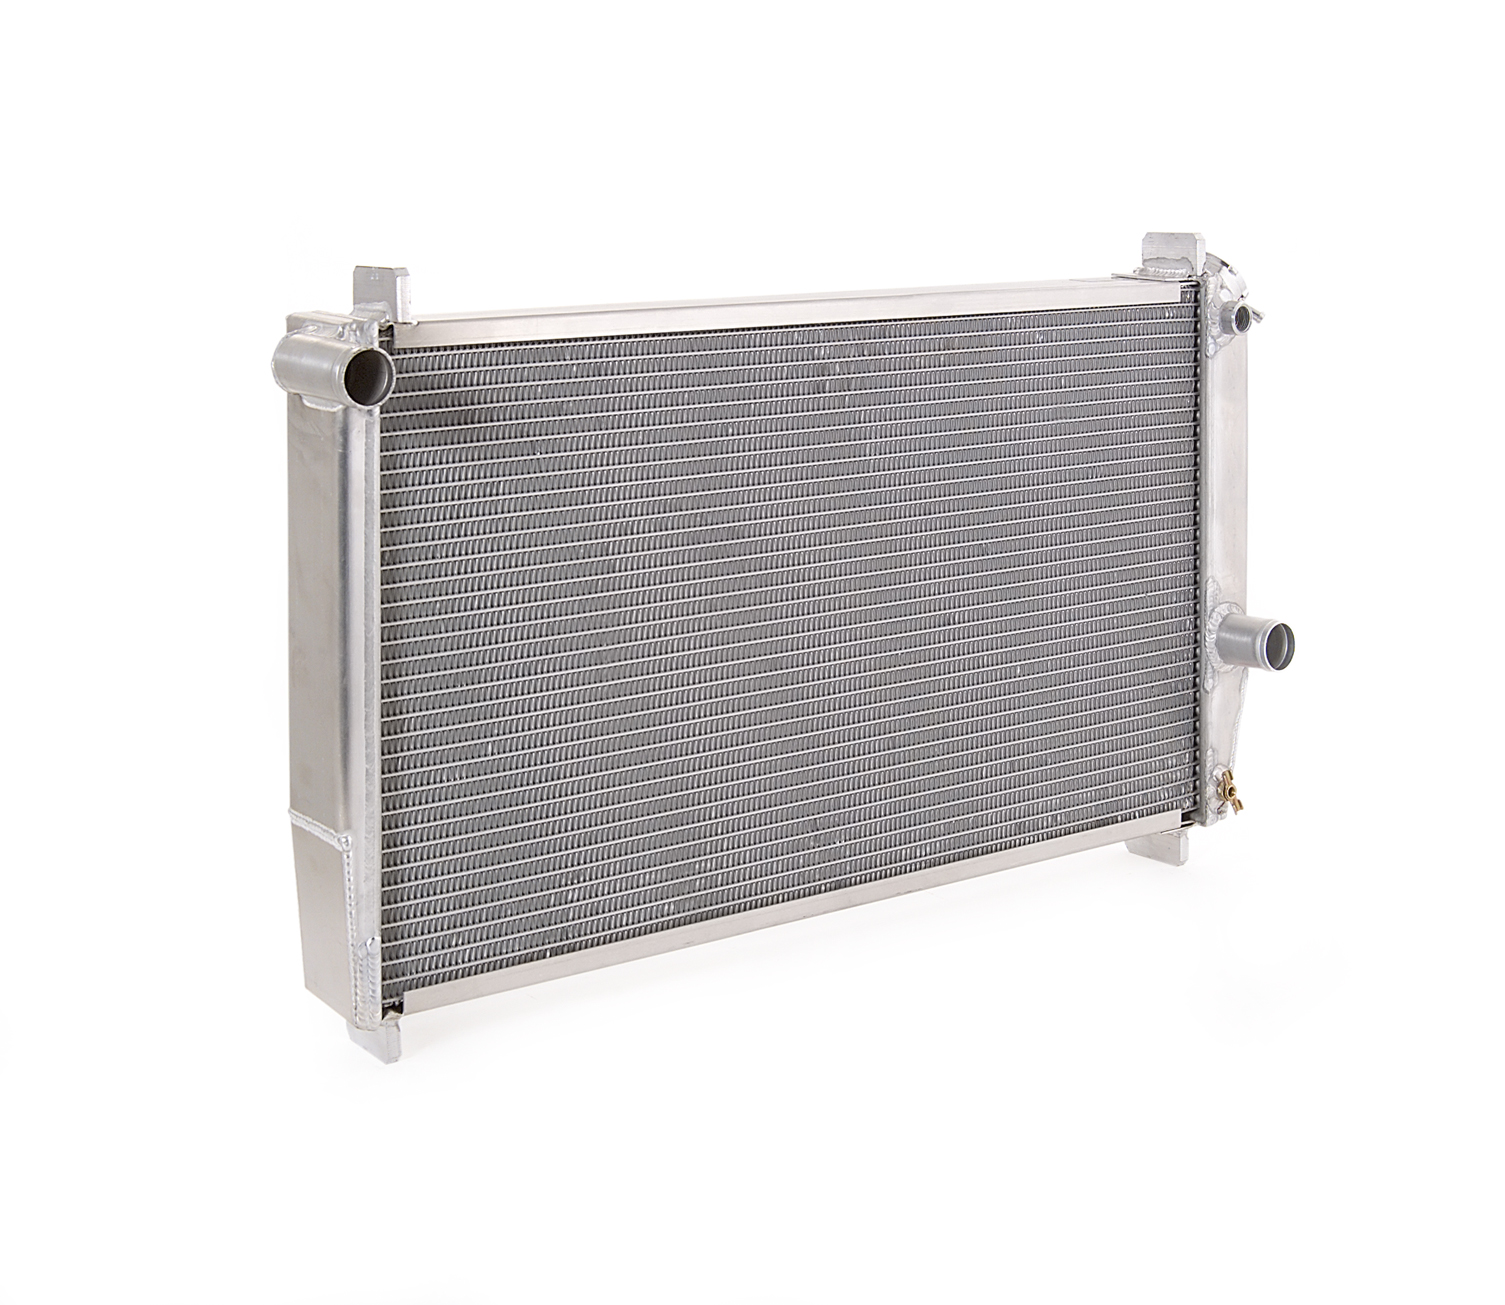 Be Cool Direct Fit Radiator for 1982-92 Camaro and Firebird, V8/Manual Transmission